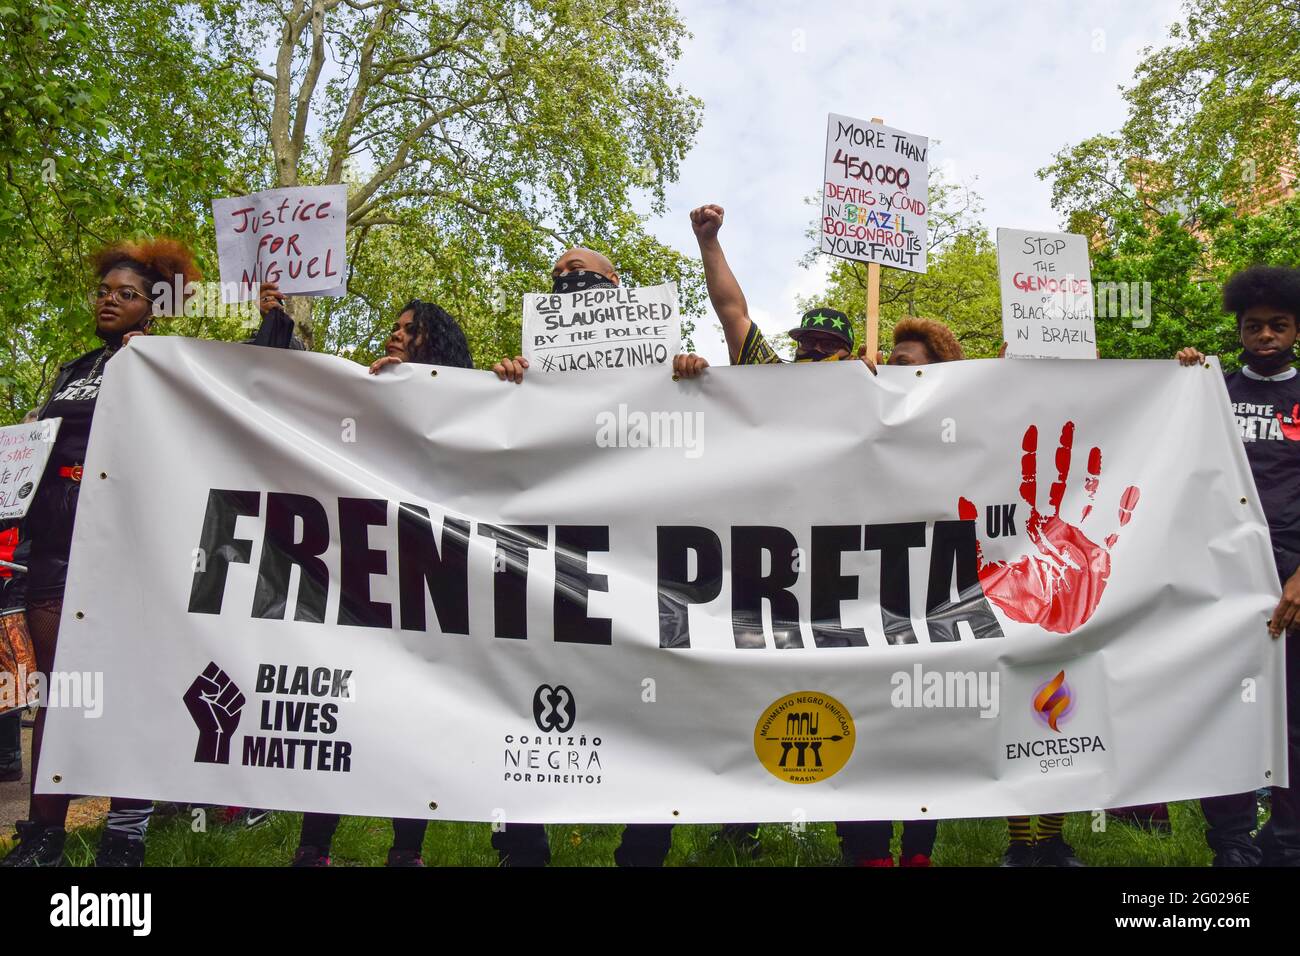 London, United Kingdom. 29th May 2021. Frente Preta UK at the Kill The Bill protest in Russell Square. Crowds marched through Central London in protest of the Police, Crime, Sentencing and Courts Bill. Stock Photo